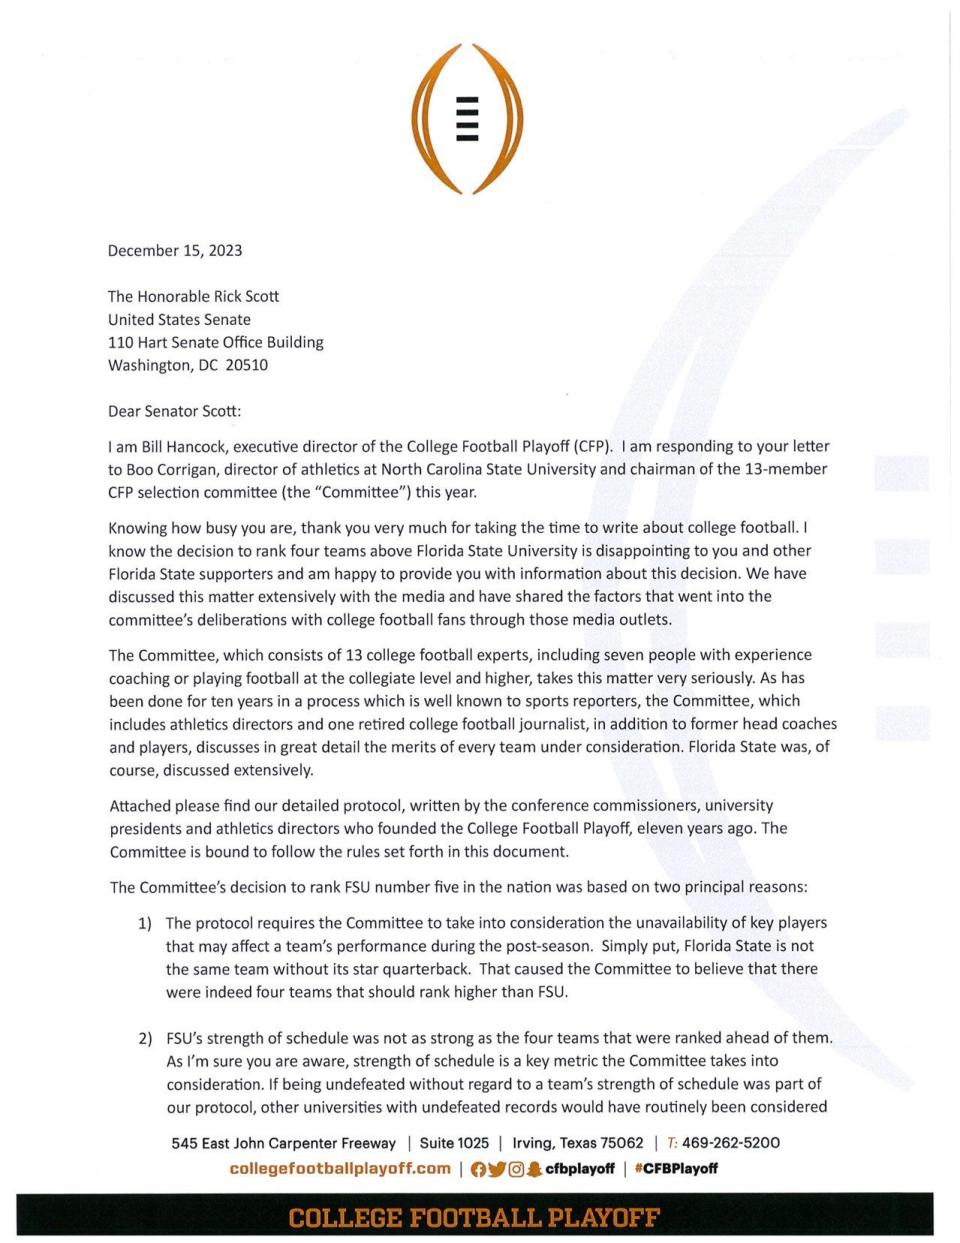 College Football Playoff Committee responds to letter from GOP Senator Rick Scott